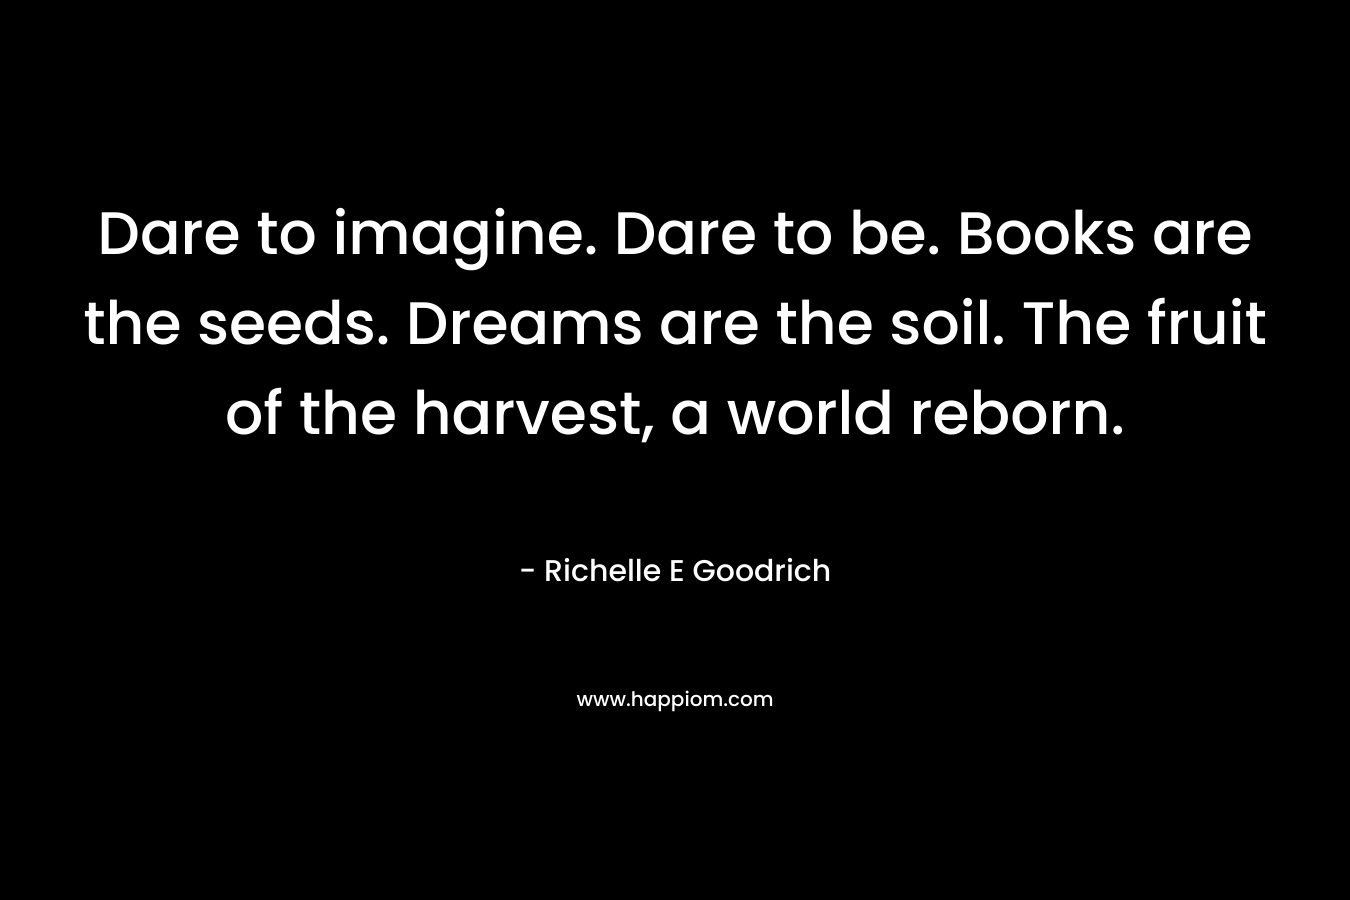 Dare to imagine. Dare to be. Books are the seeds. Dreams are the soil. The fruit of the harvest, a world reborn.